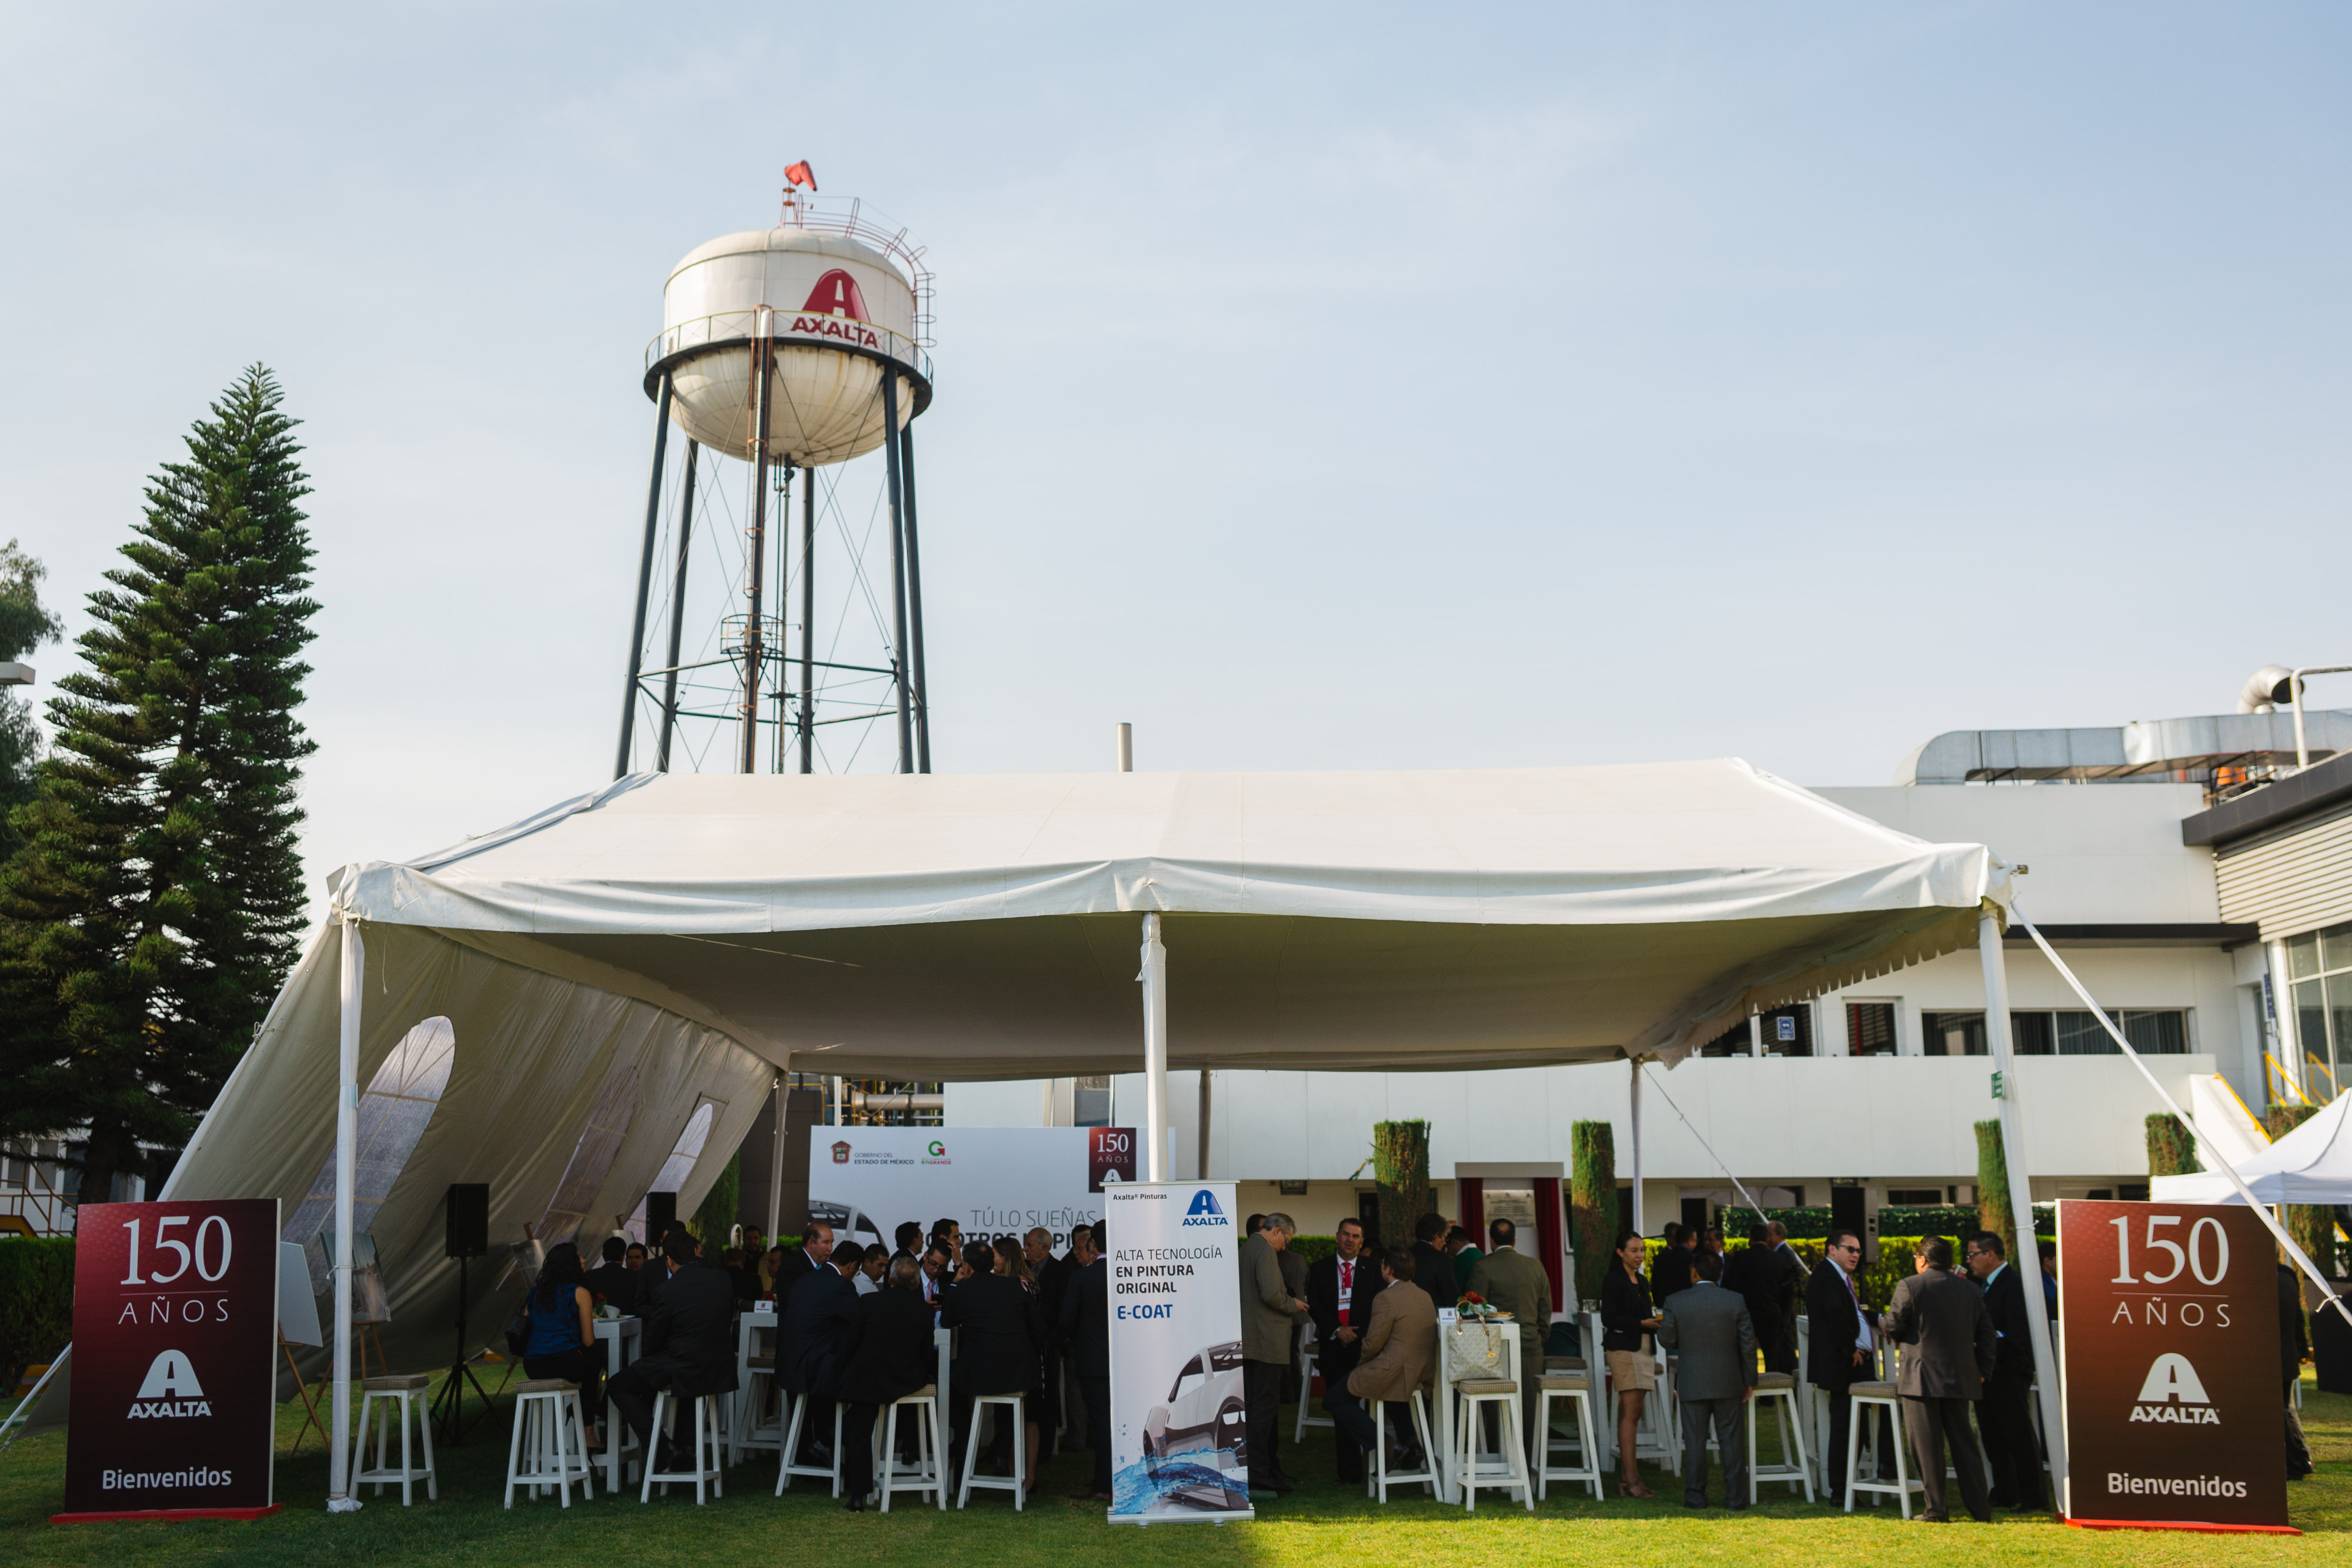 Commemorating Axalta’s 150th anniversary at the opening of the expansion of the manufacturing center in Tlalnepantla, Mexico